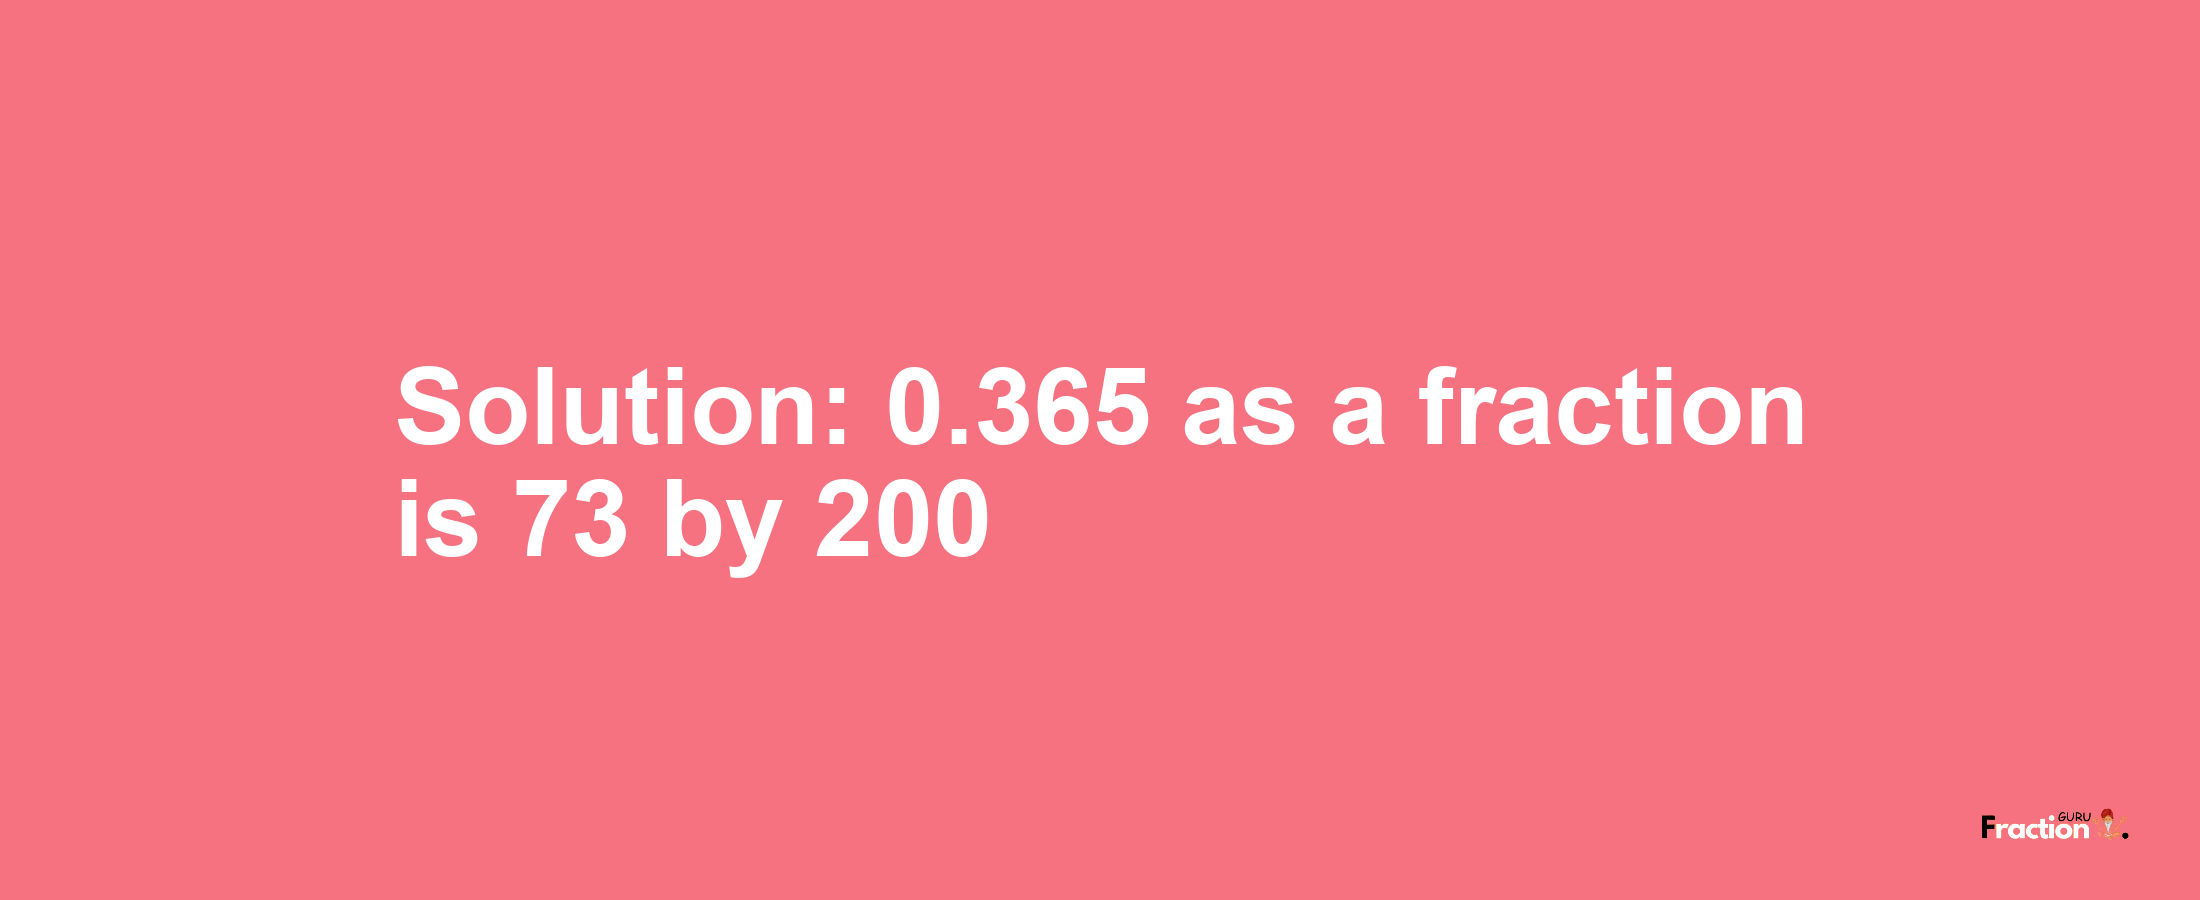 Solution:0.365 as a fraction is 73/200